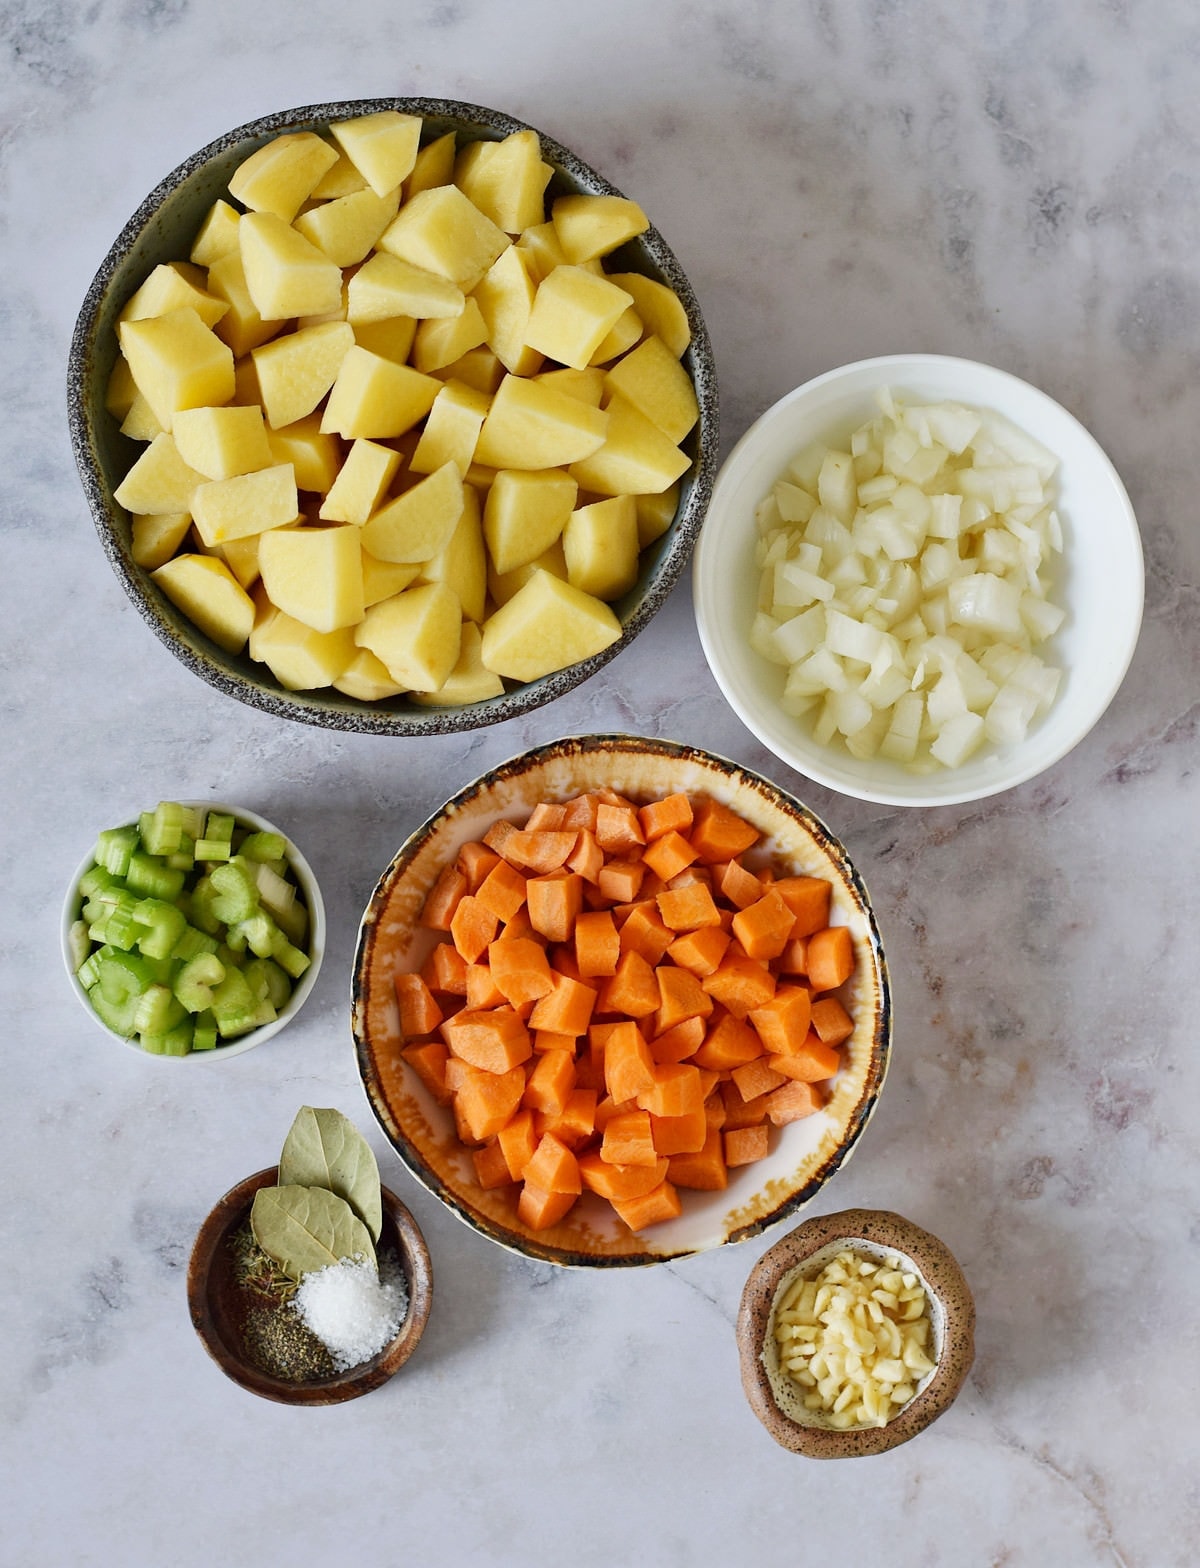 Ingredients for a stew with potatoes